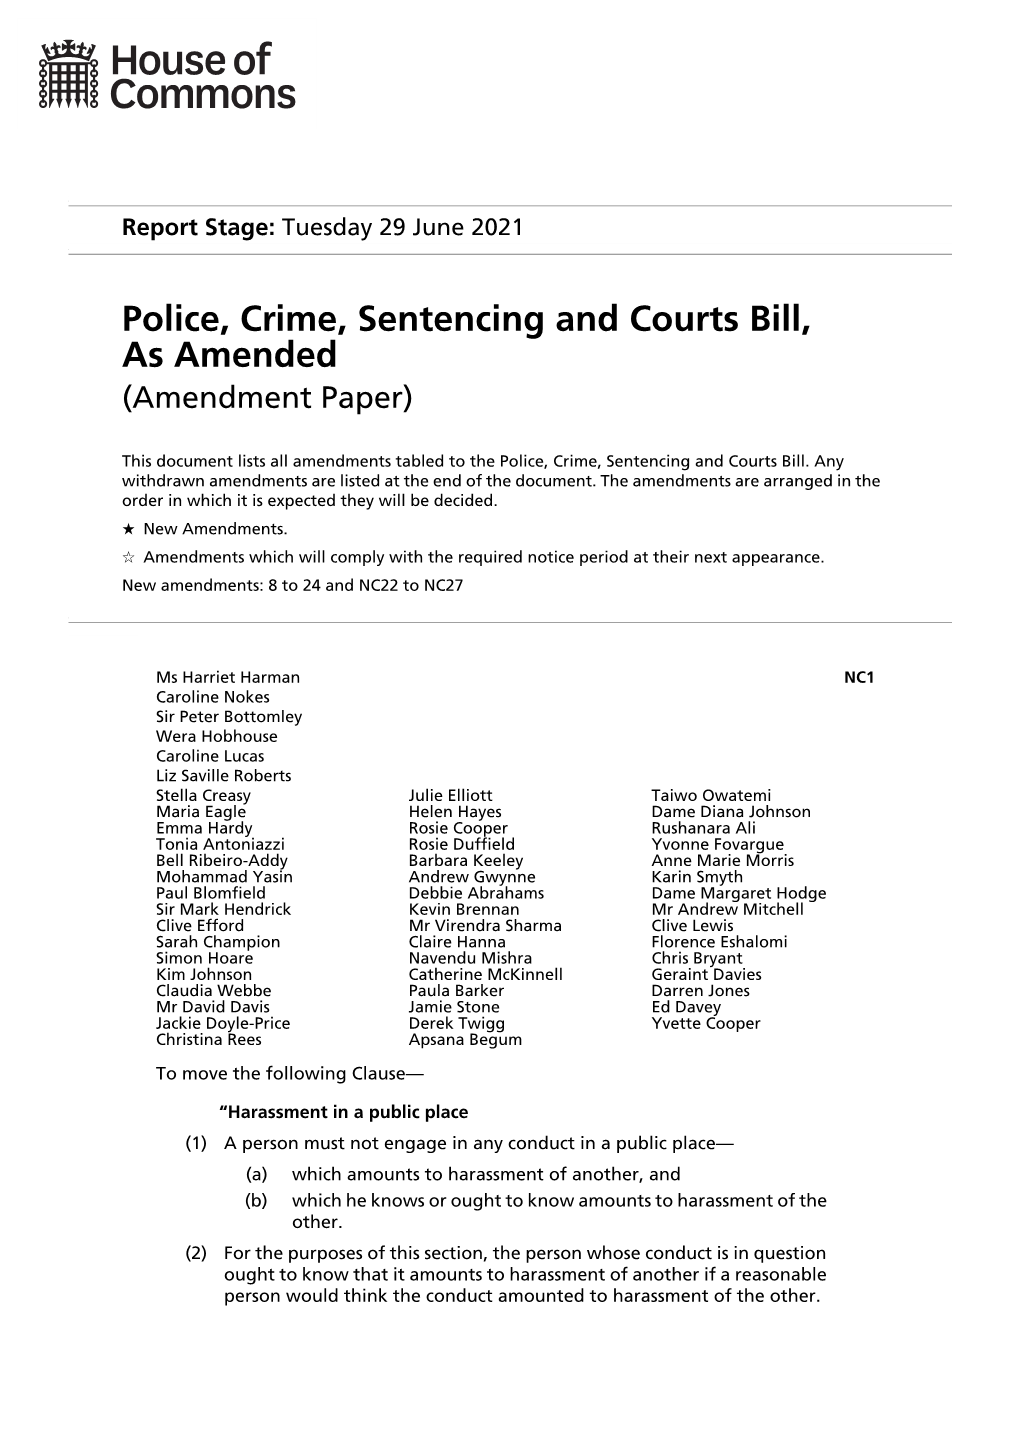 Police, Crime, Sentencing and Courts Bill, As Amended (Amendment Paper)